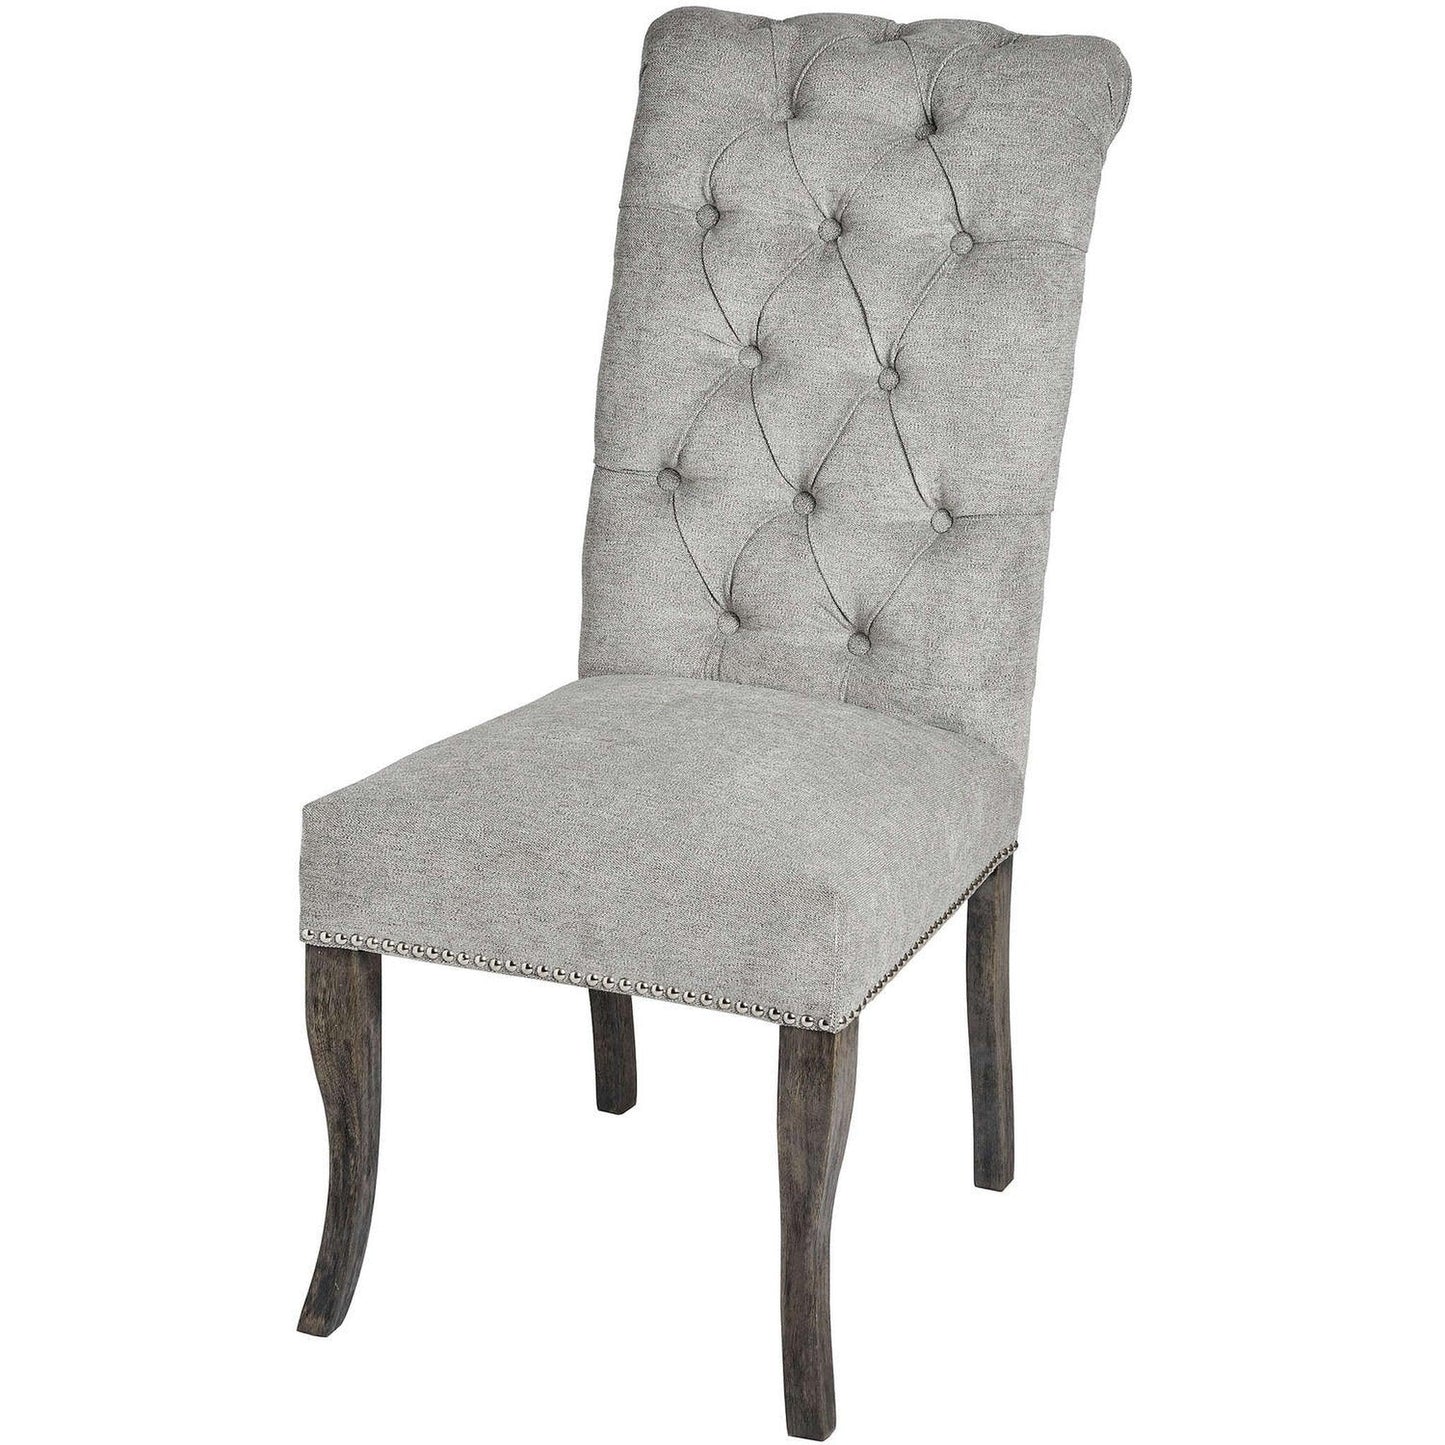 Silver Roll Top Dining Chair - Abode Decor